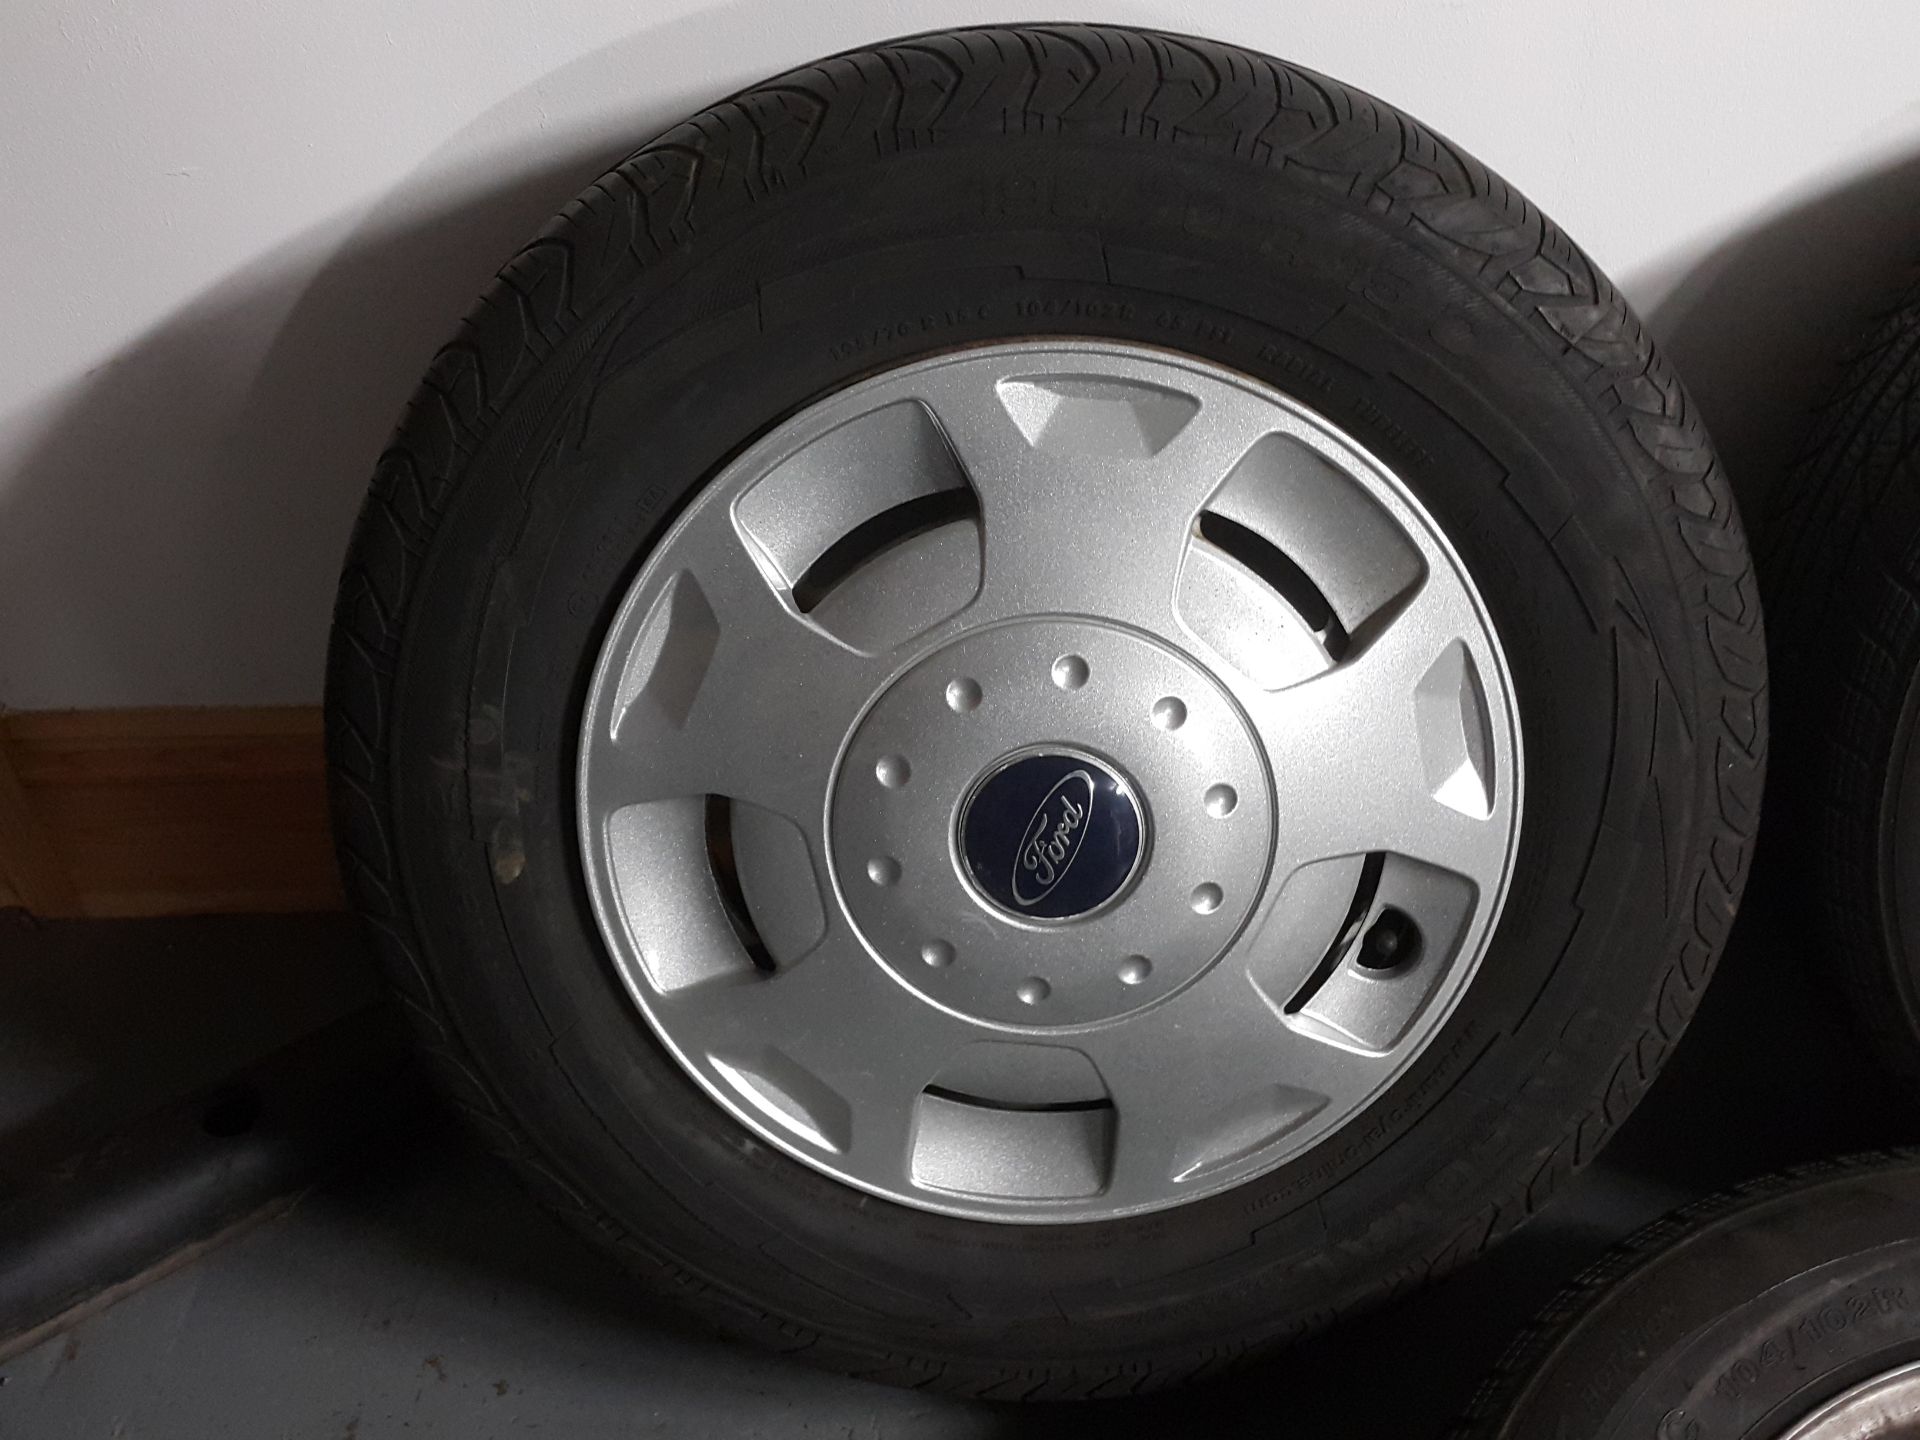 4 X FORD TRANSIT 15" STEEL RIMS WITH TYRES 195/70/R15 (2 UNIROYAL 2 OTHERS) - Image 2 of 9